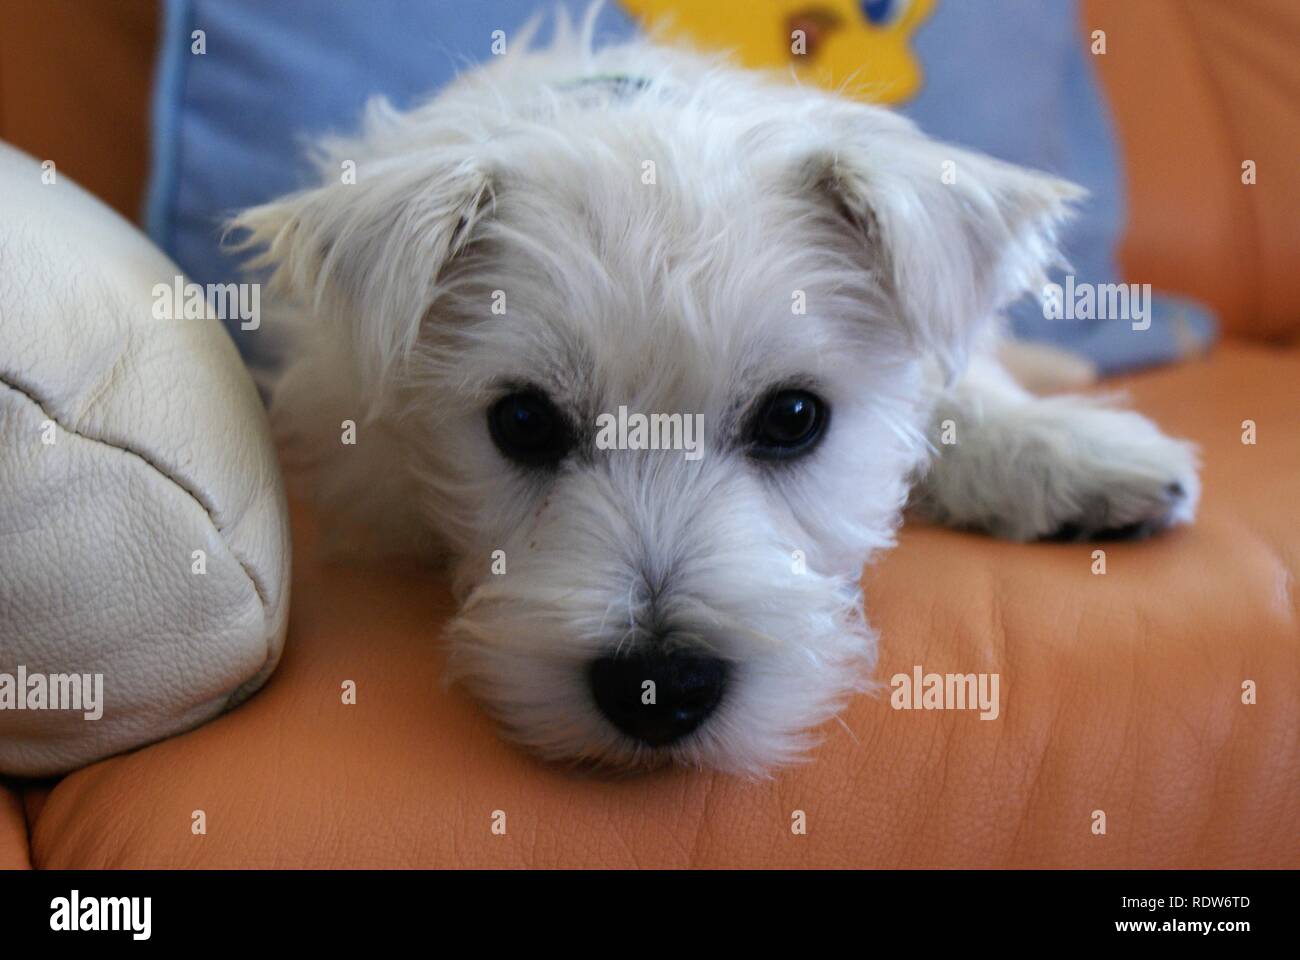 West highland white terrier puppy lying on the bed Stock Photo